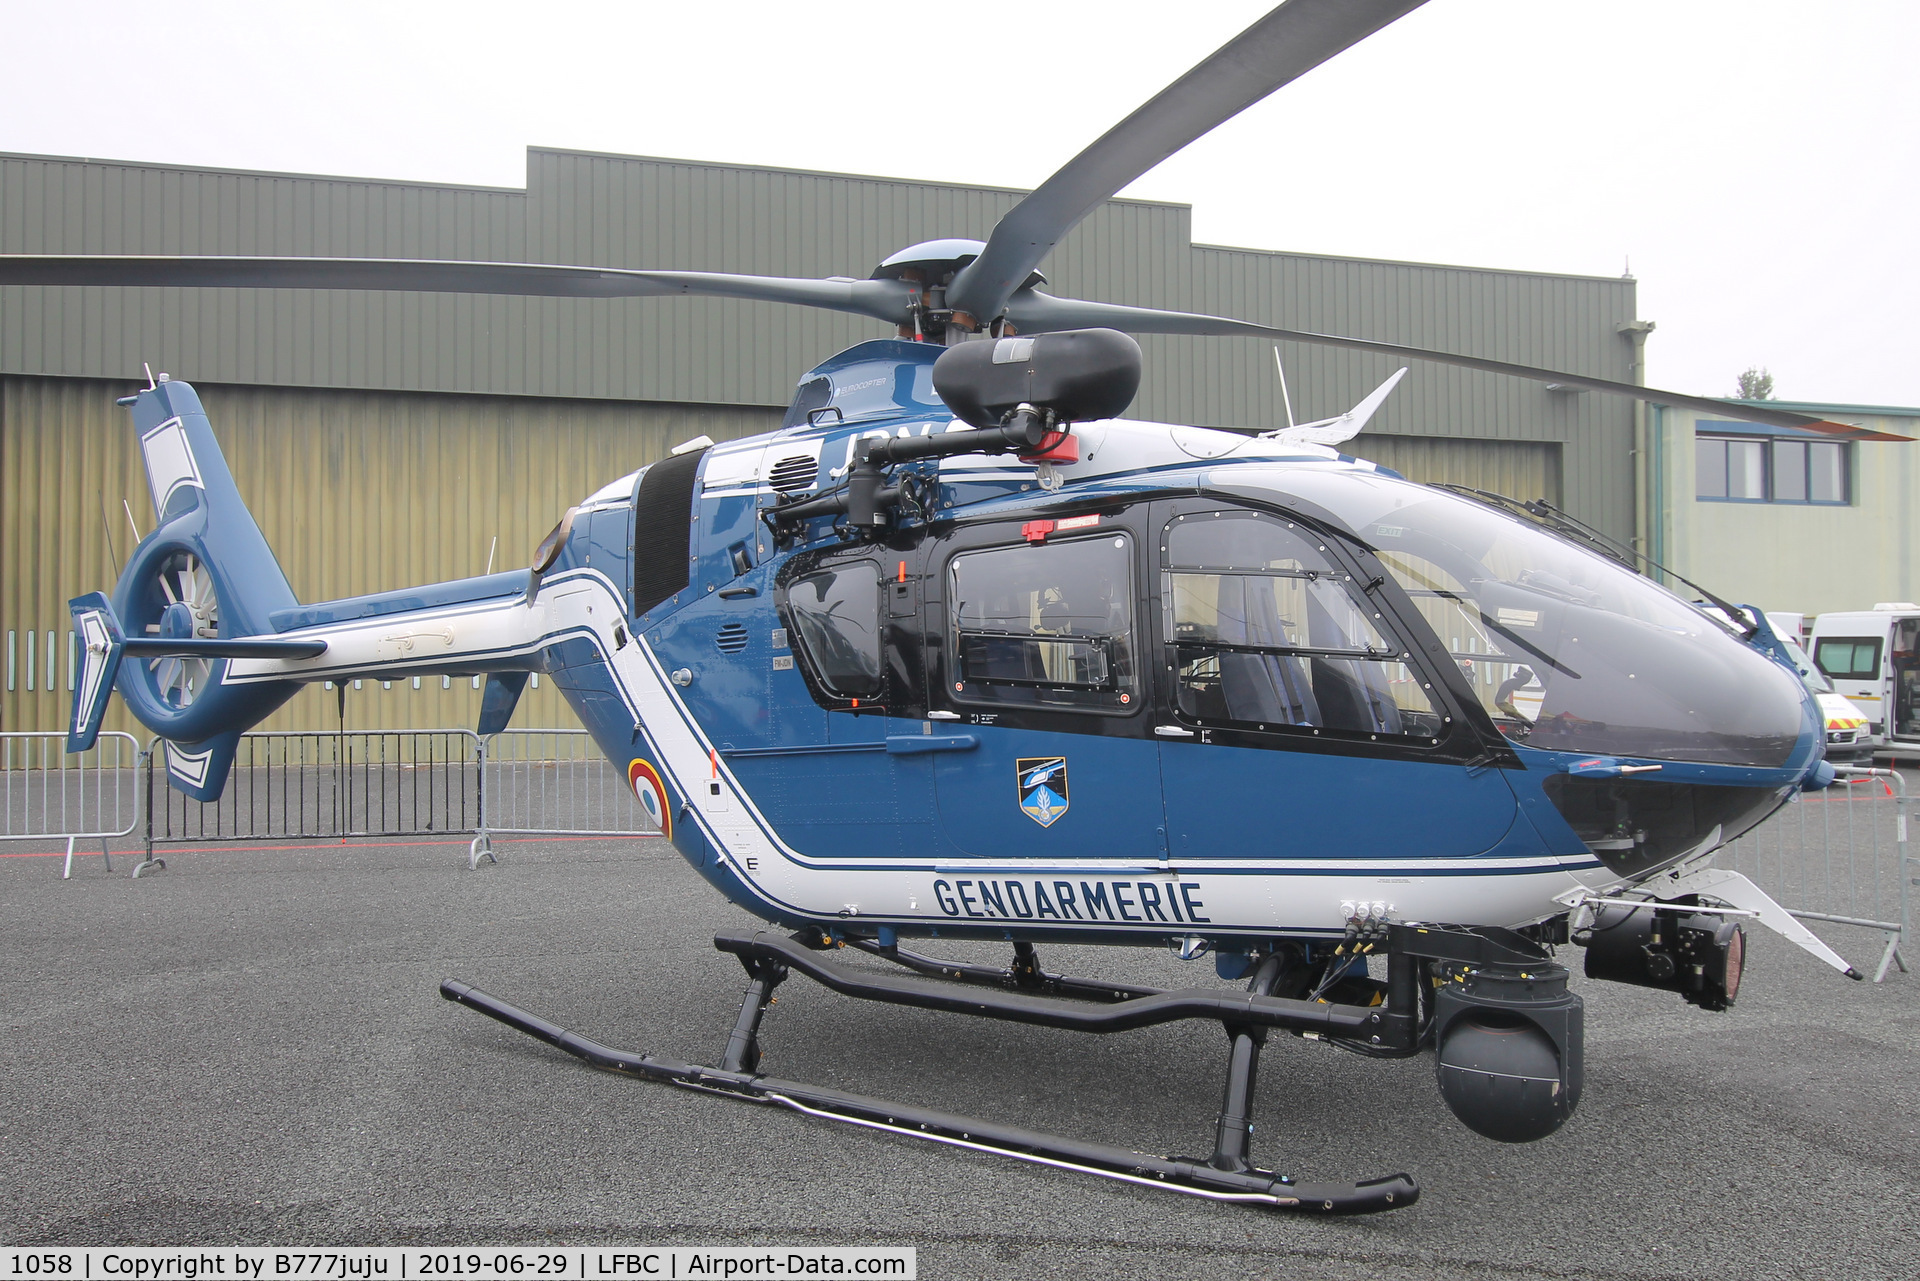 1058, 2012 Eurocopter EC-135T-2 C/N 1058, at Cazaux Airshow